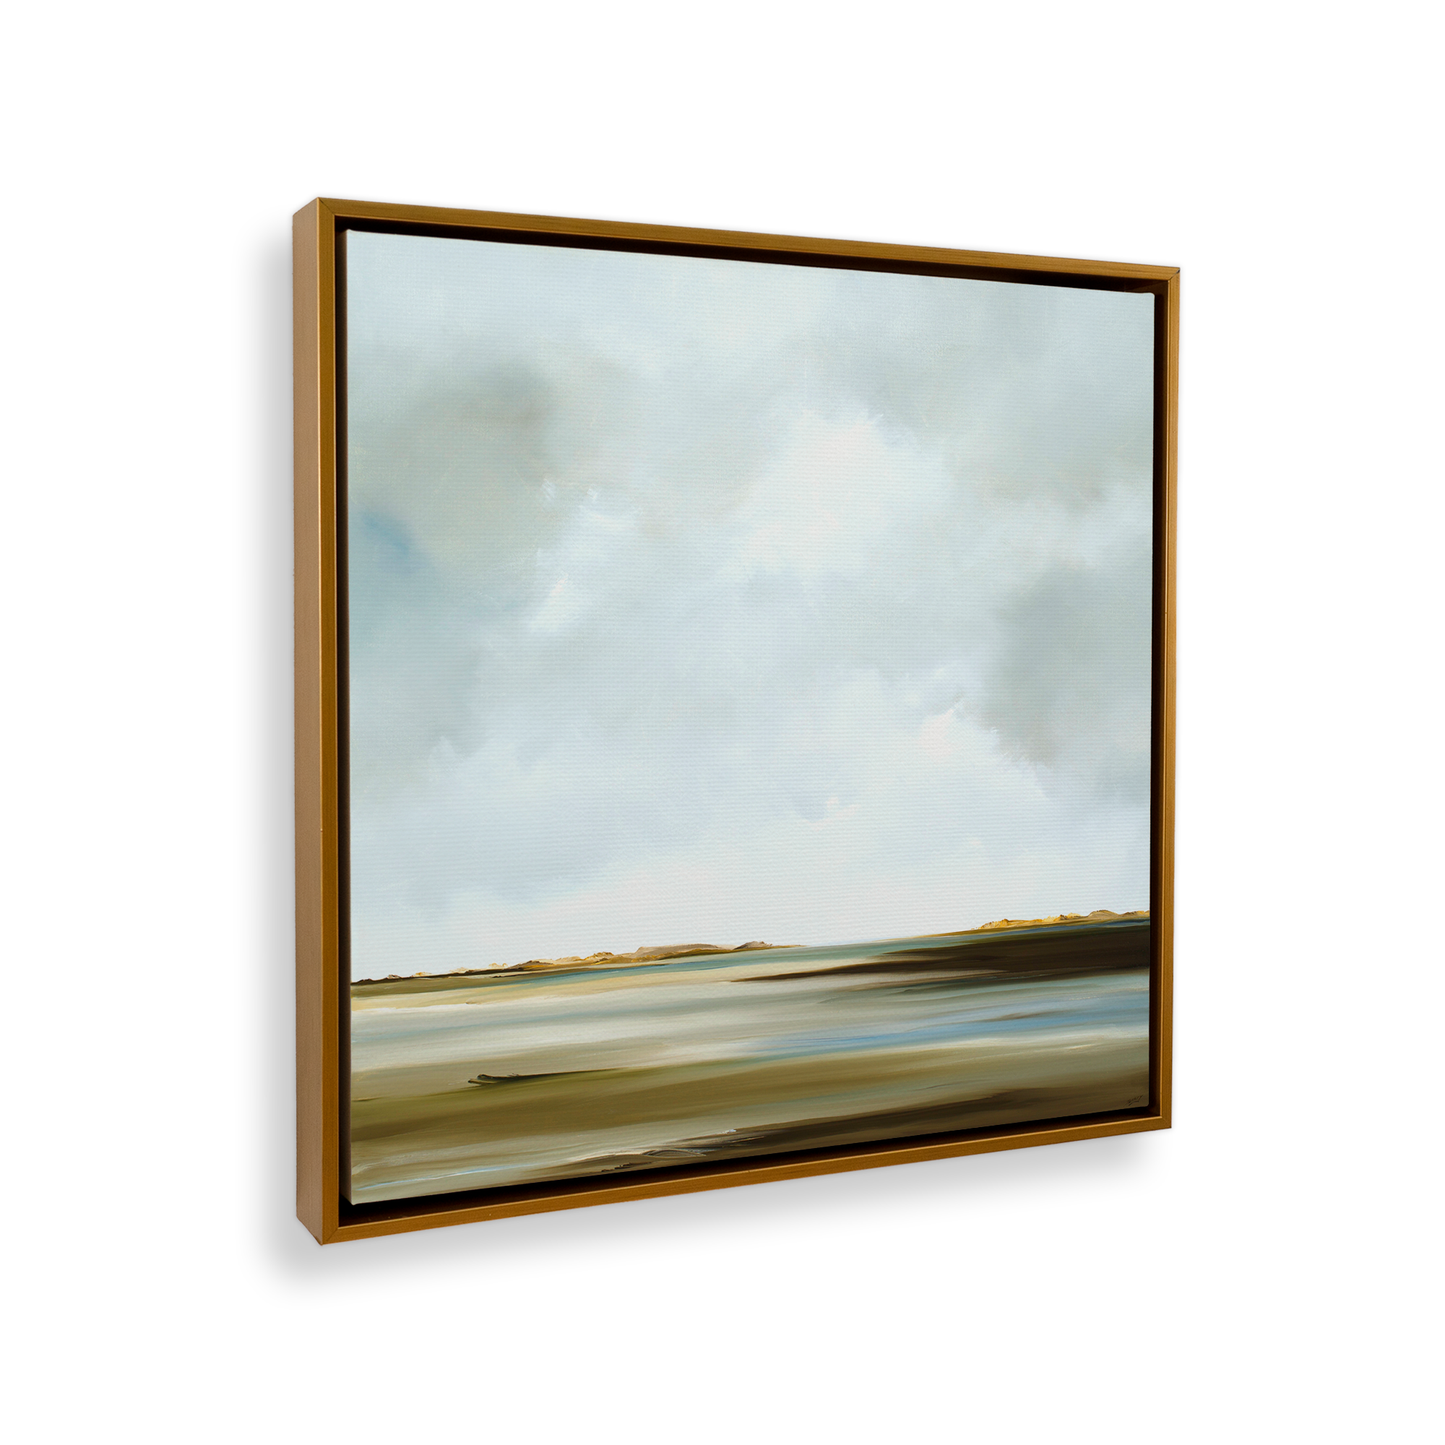 [color:Polished Gold],[shape:square], Picture of art in a black frame at angle